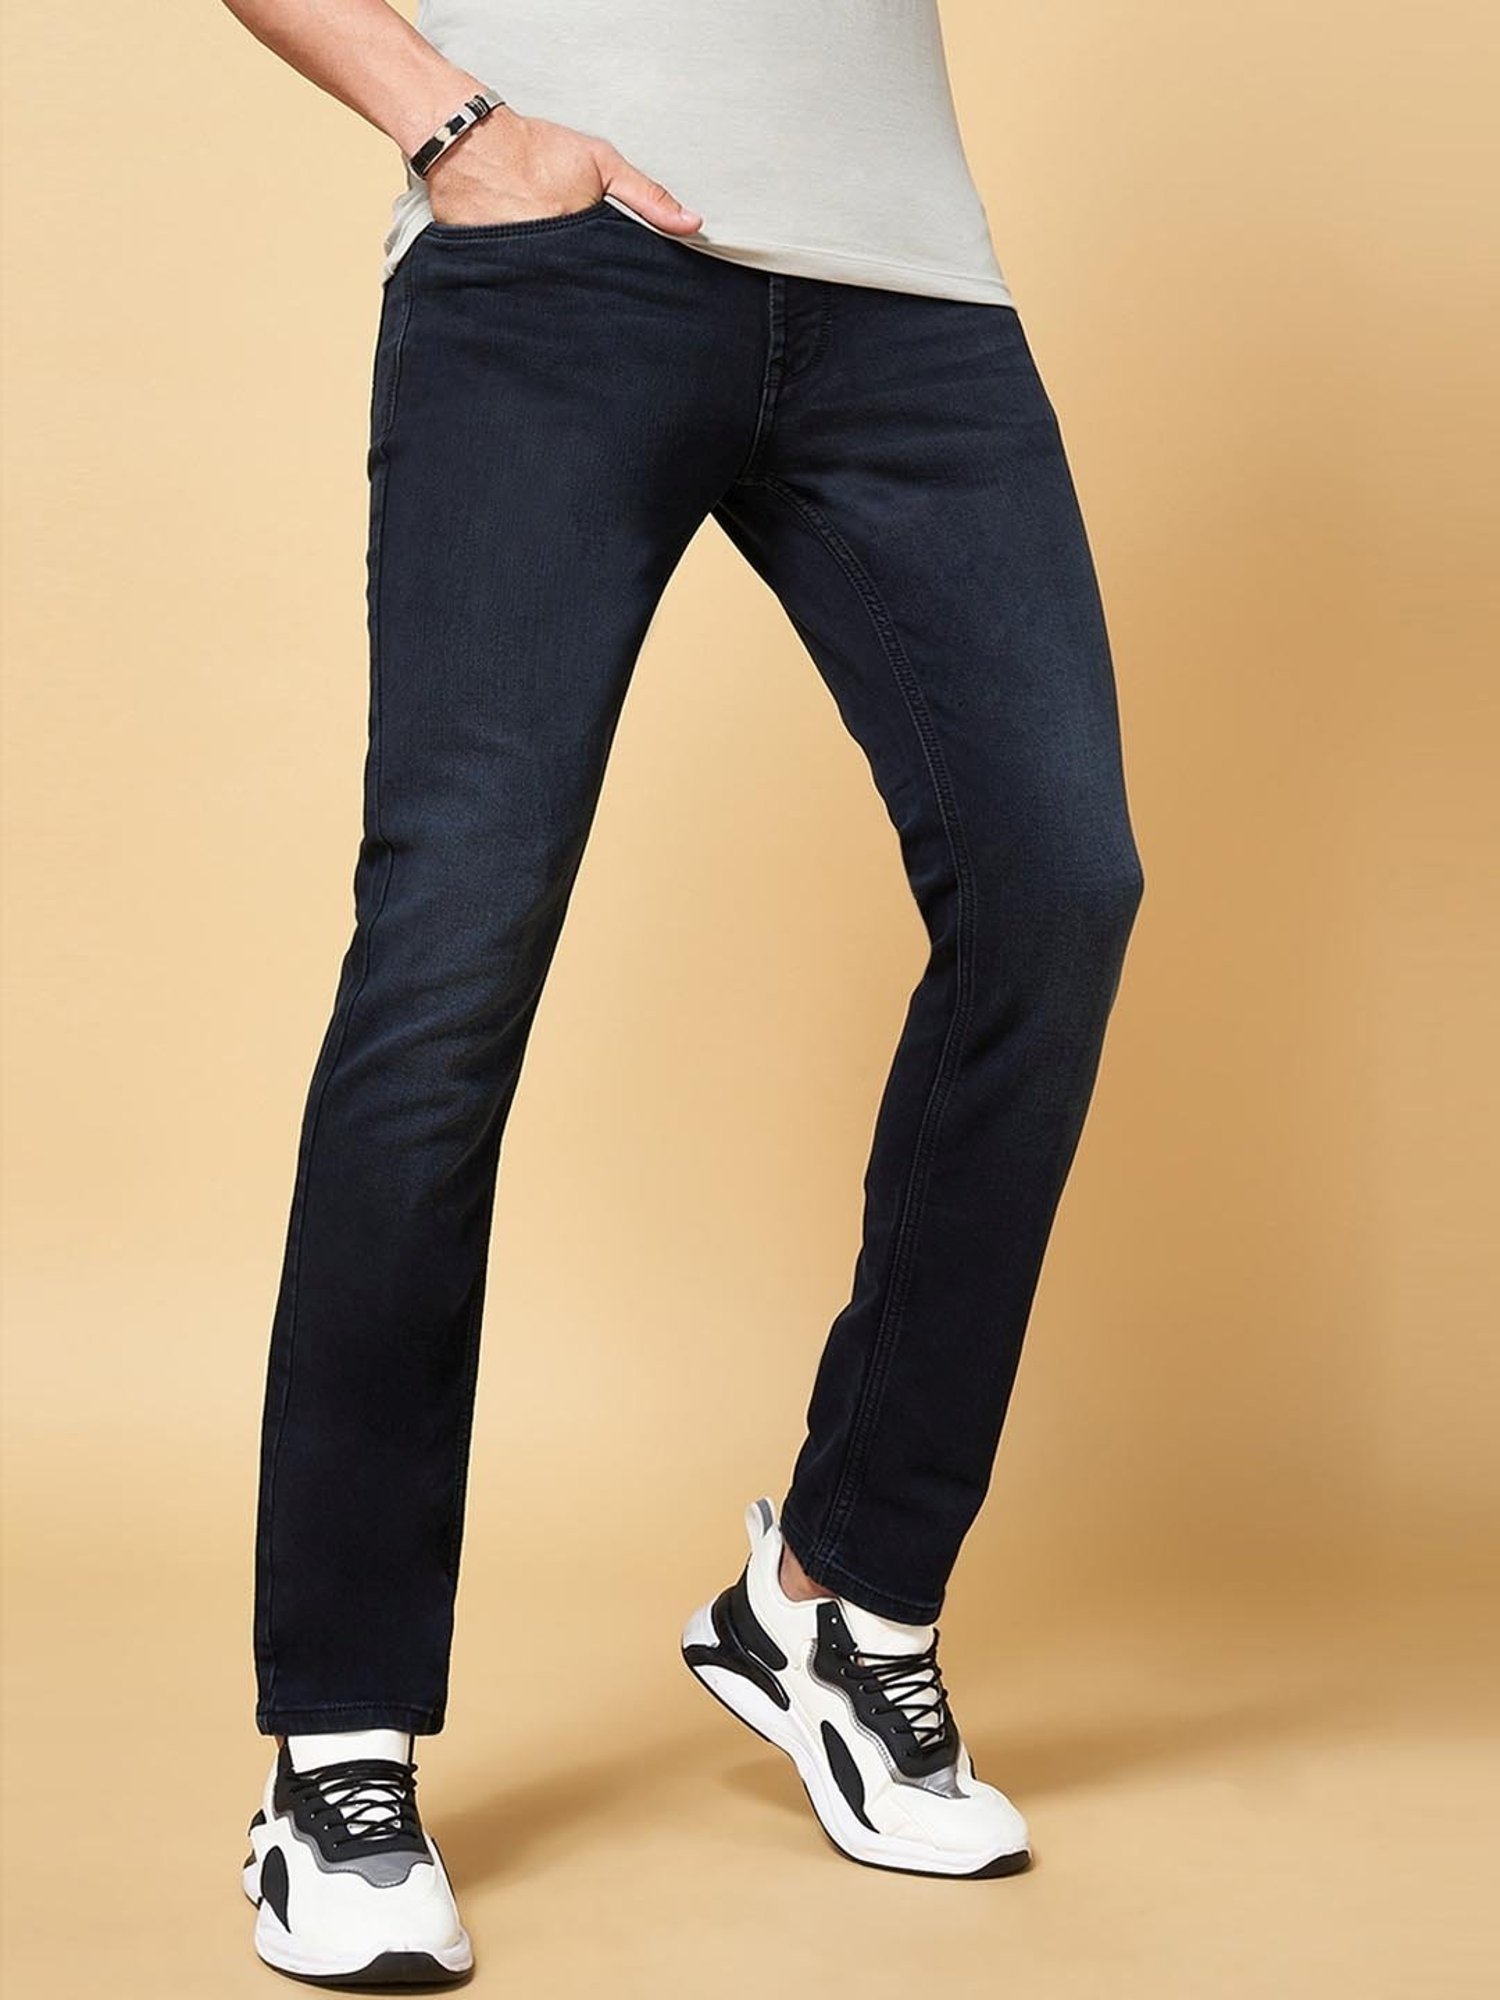 Buy SF Jeans By Pantaloons Men Blue Skinny Fit Jeans Online at Low Prices  in India - Paytmmall.com